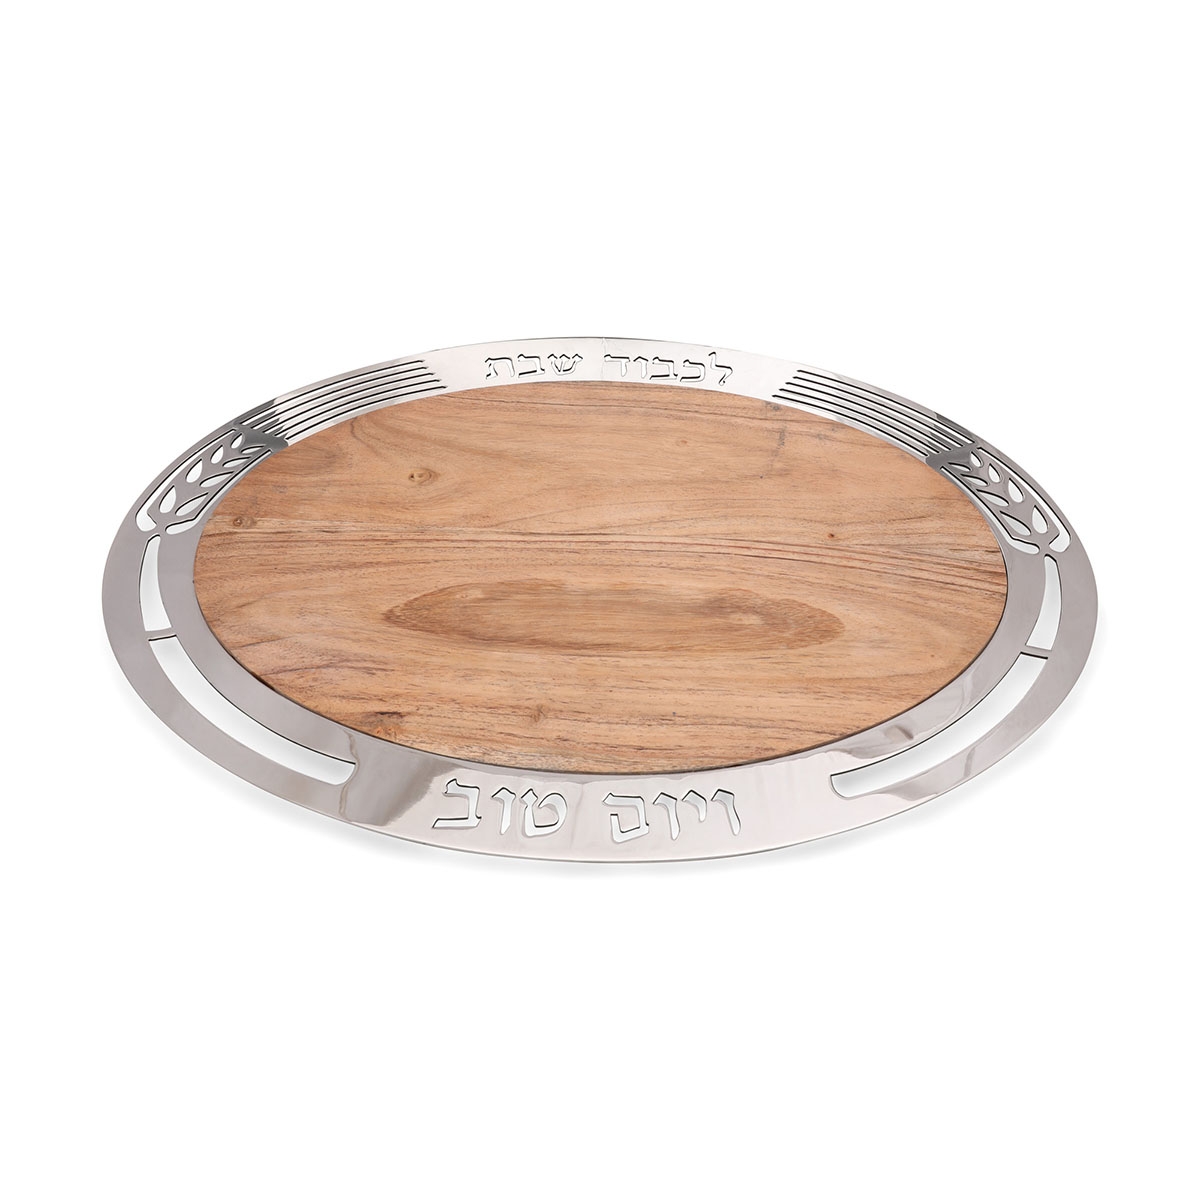 Yair Emanuel Round Wooden Challah Board With Wheat Design - 1